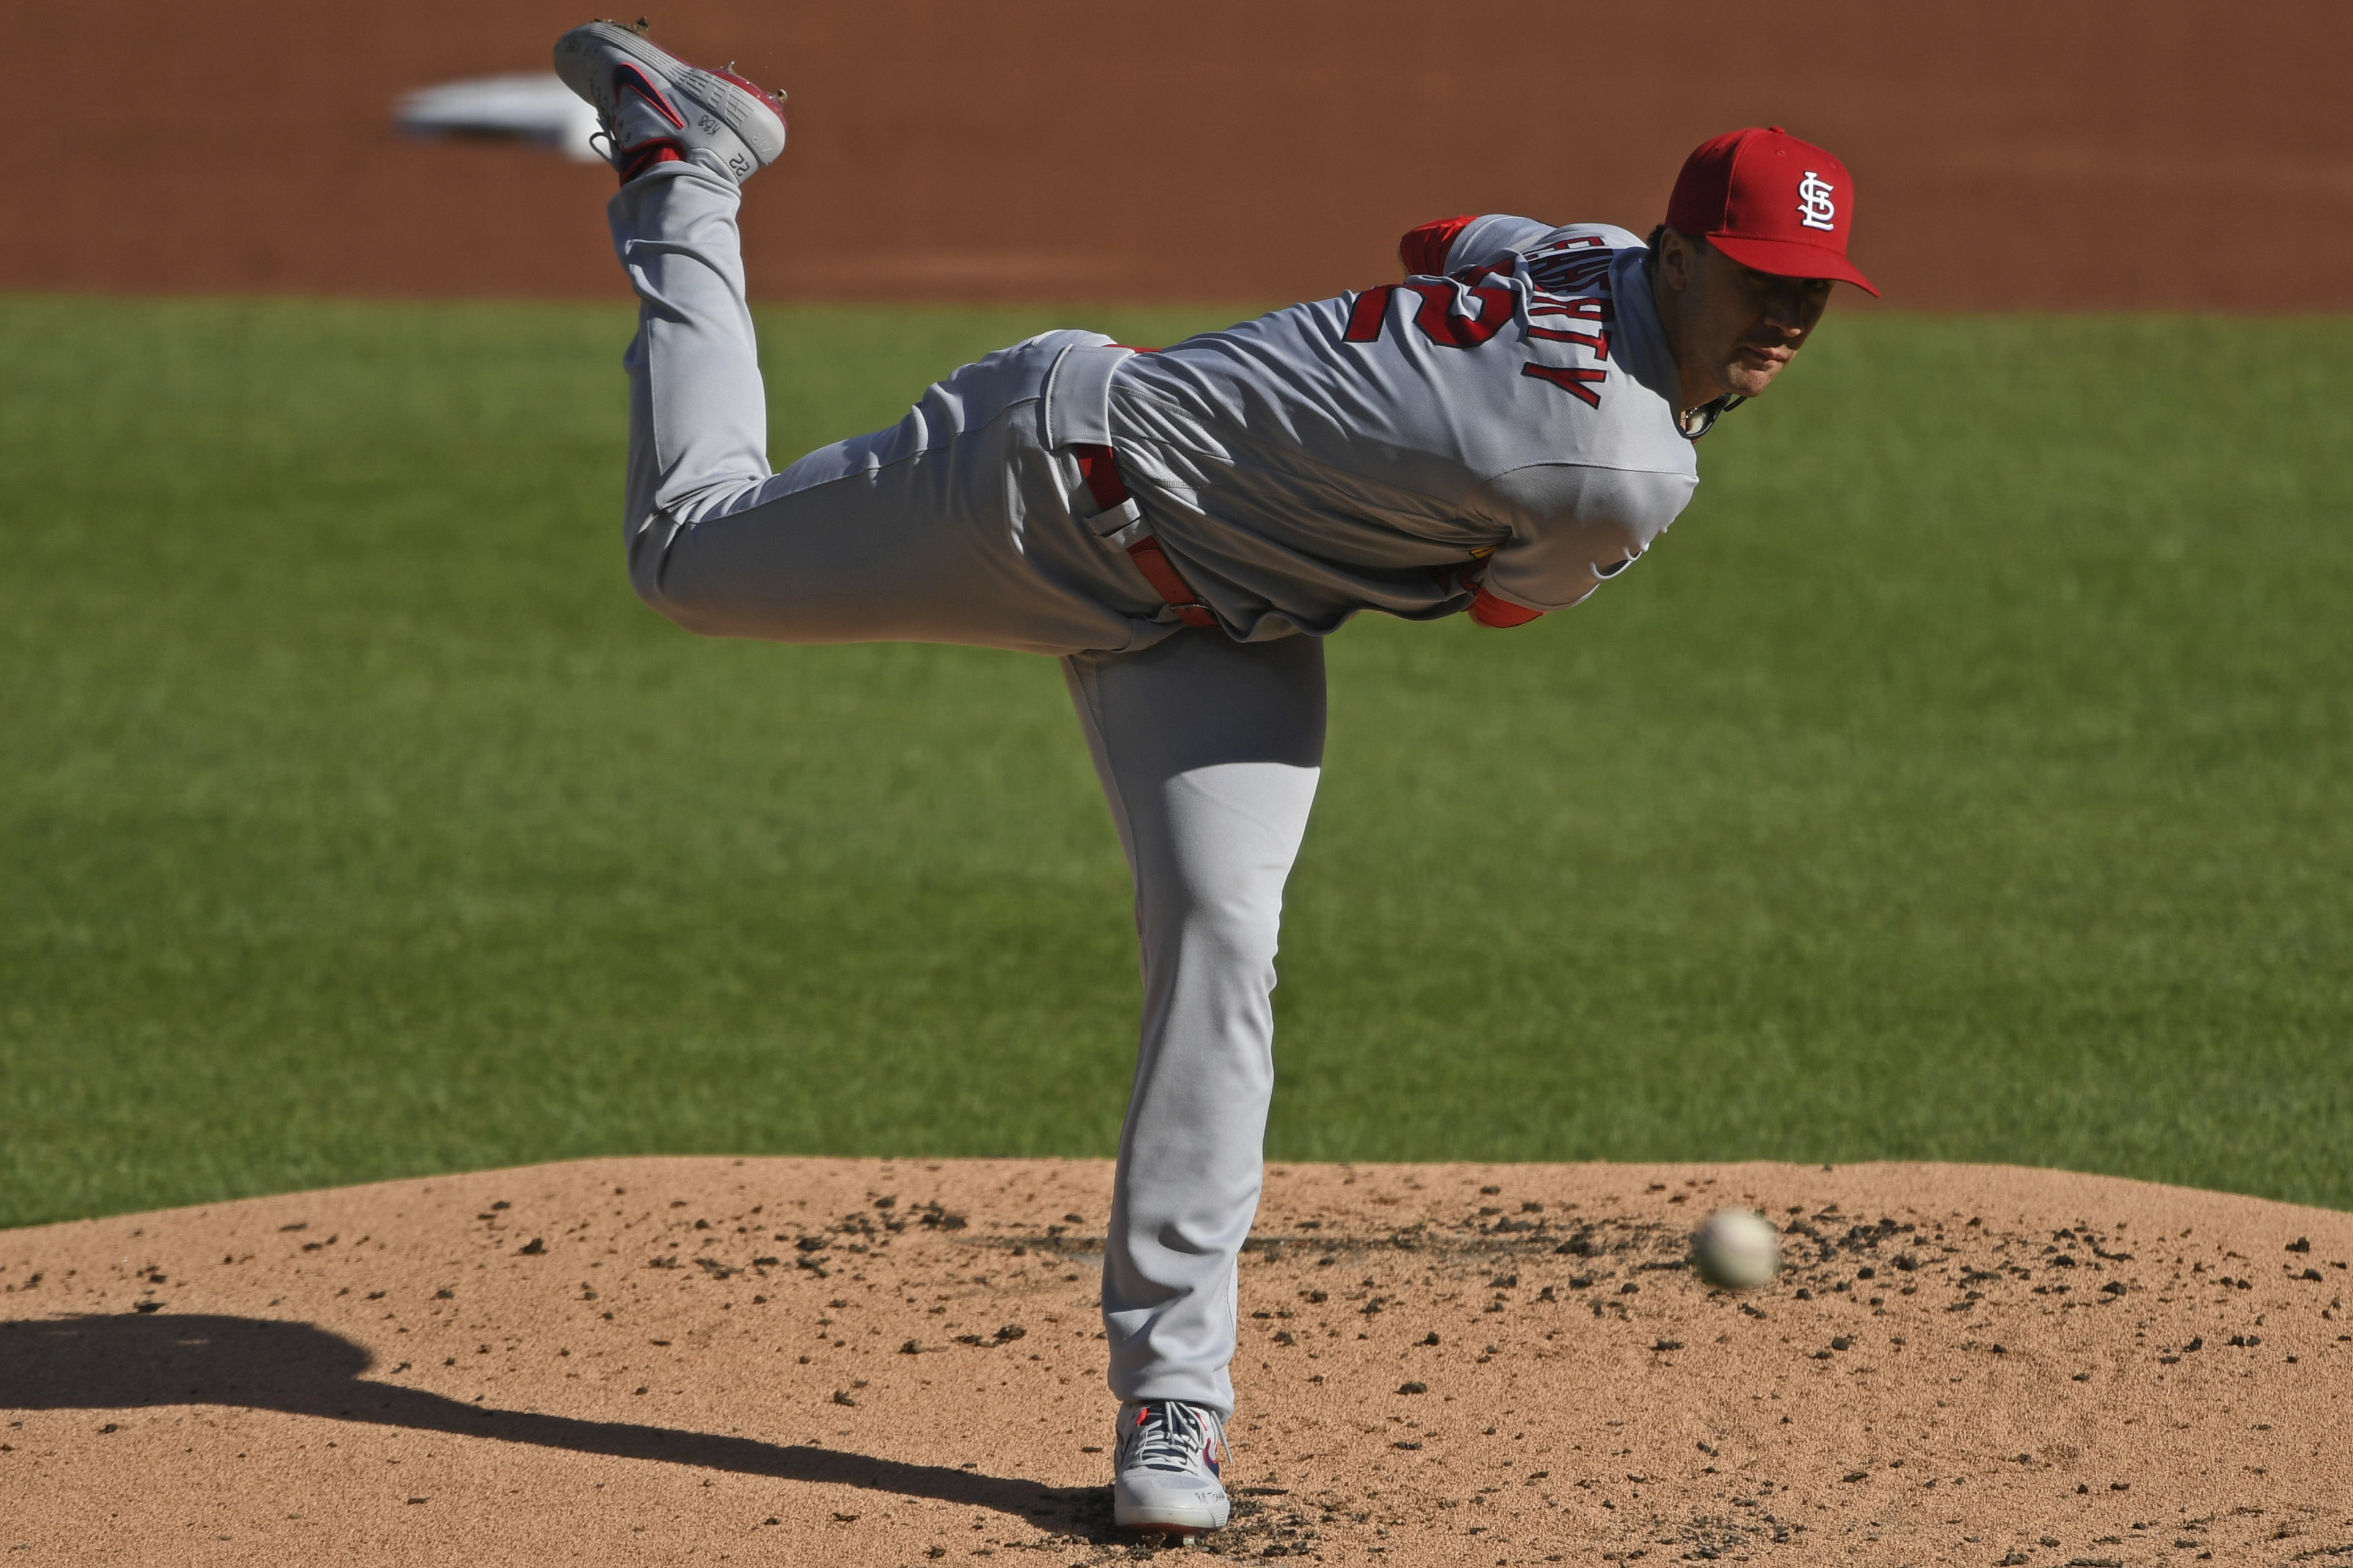 Cardinals pitcher Jack Flaherty among MLB players to win arbitration cases